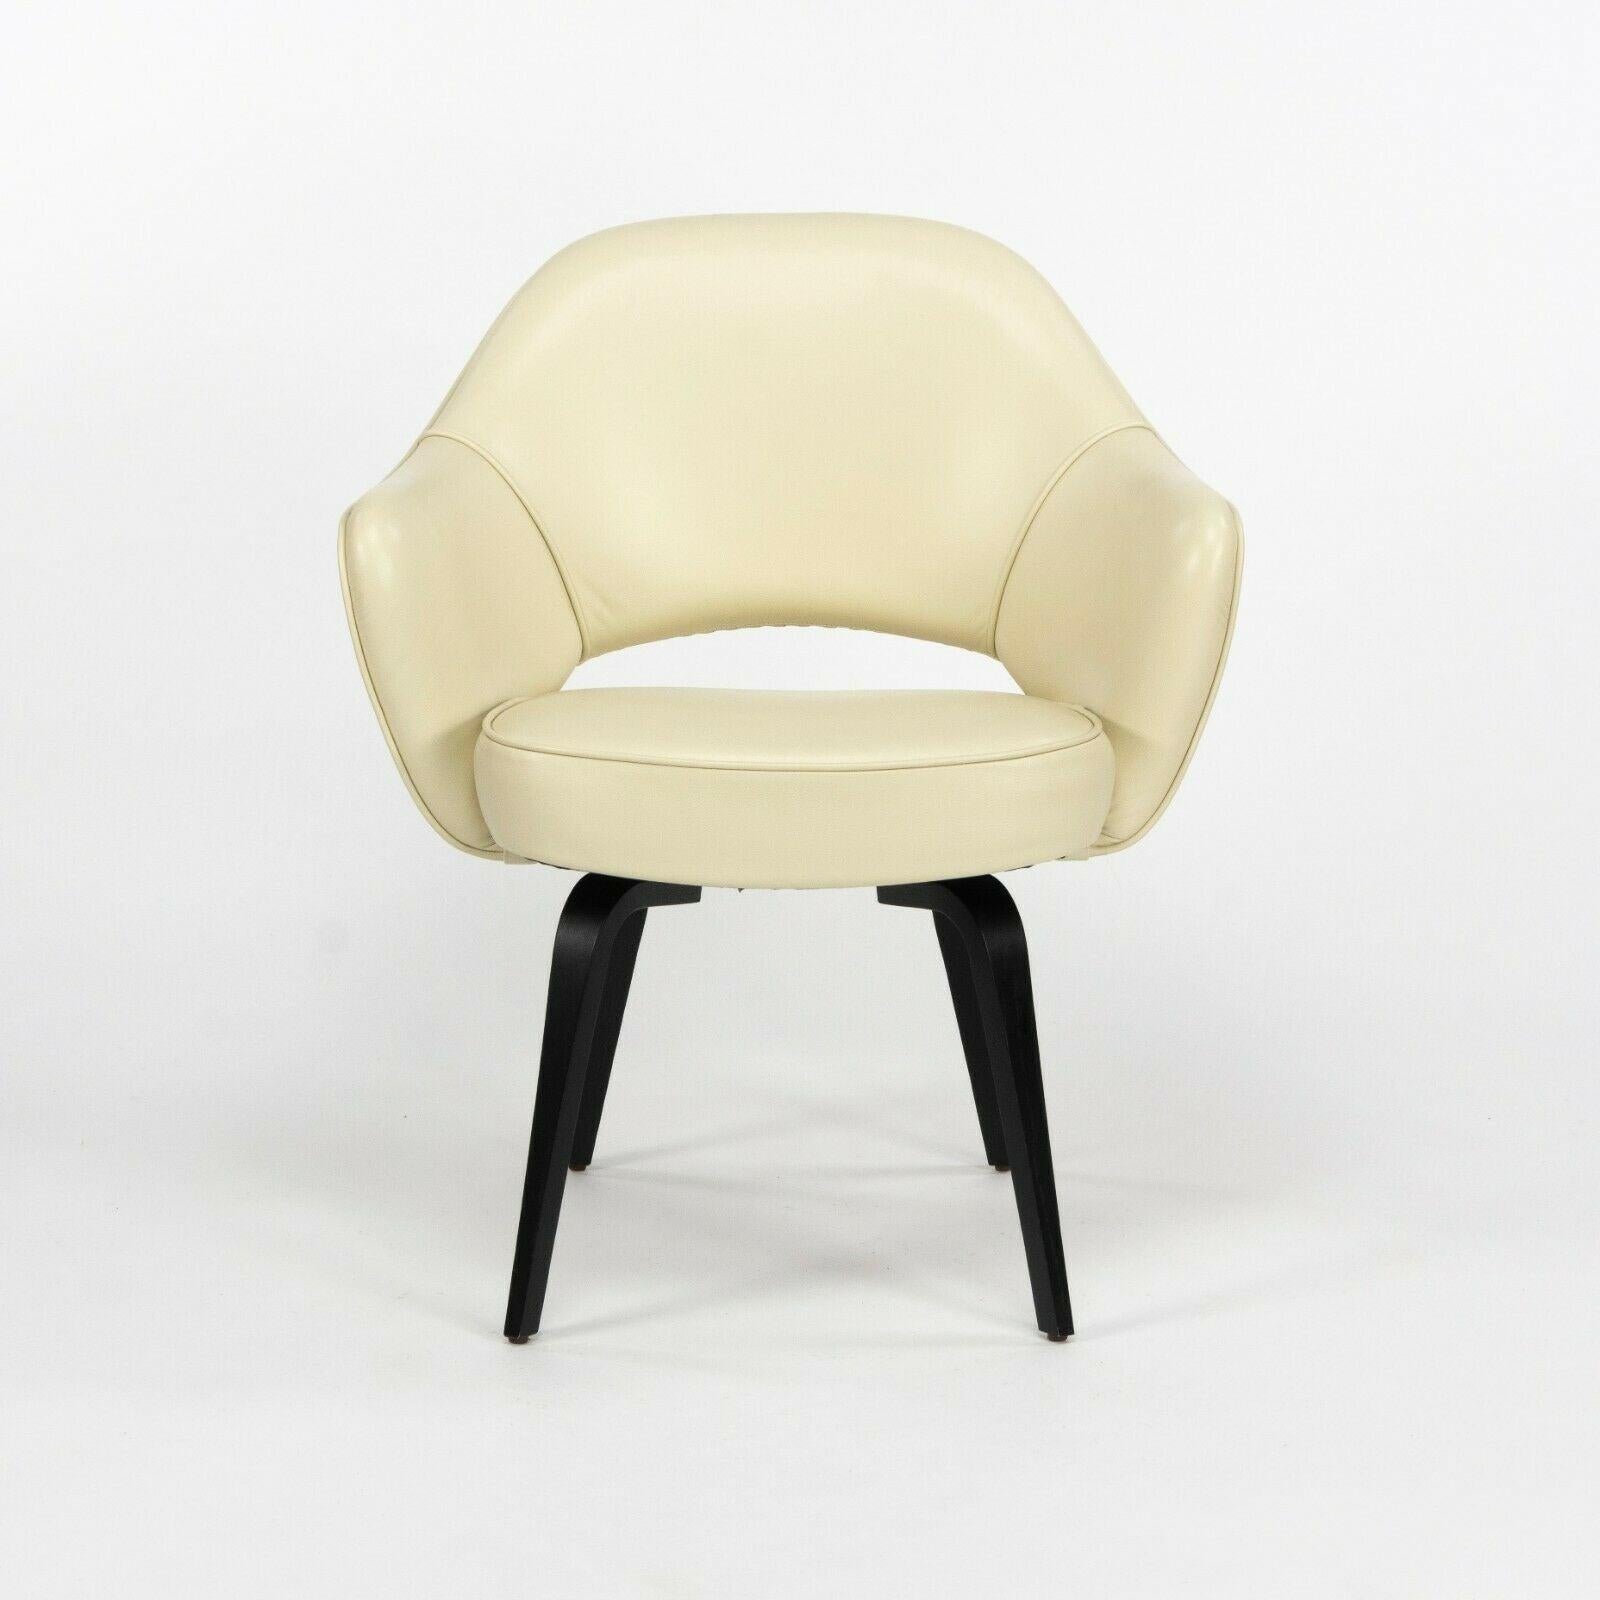 Listed for sale is a single 2020 production Eero Saarinen for Knoll Executive arm chair with ivory/off-white leather upholstery and ebonized walnut wood legs. The upholstery appears to be Knoll's Volo leather or similar. The color is